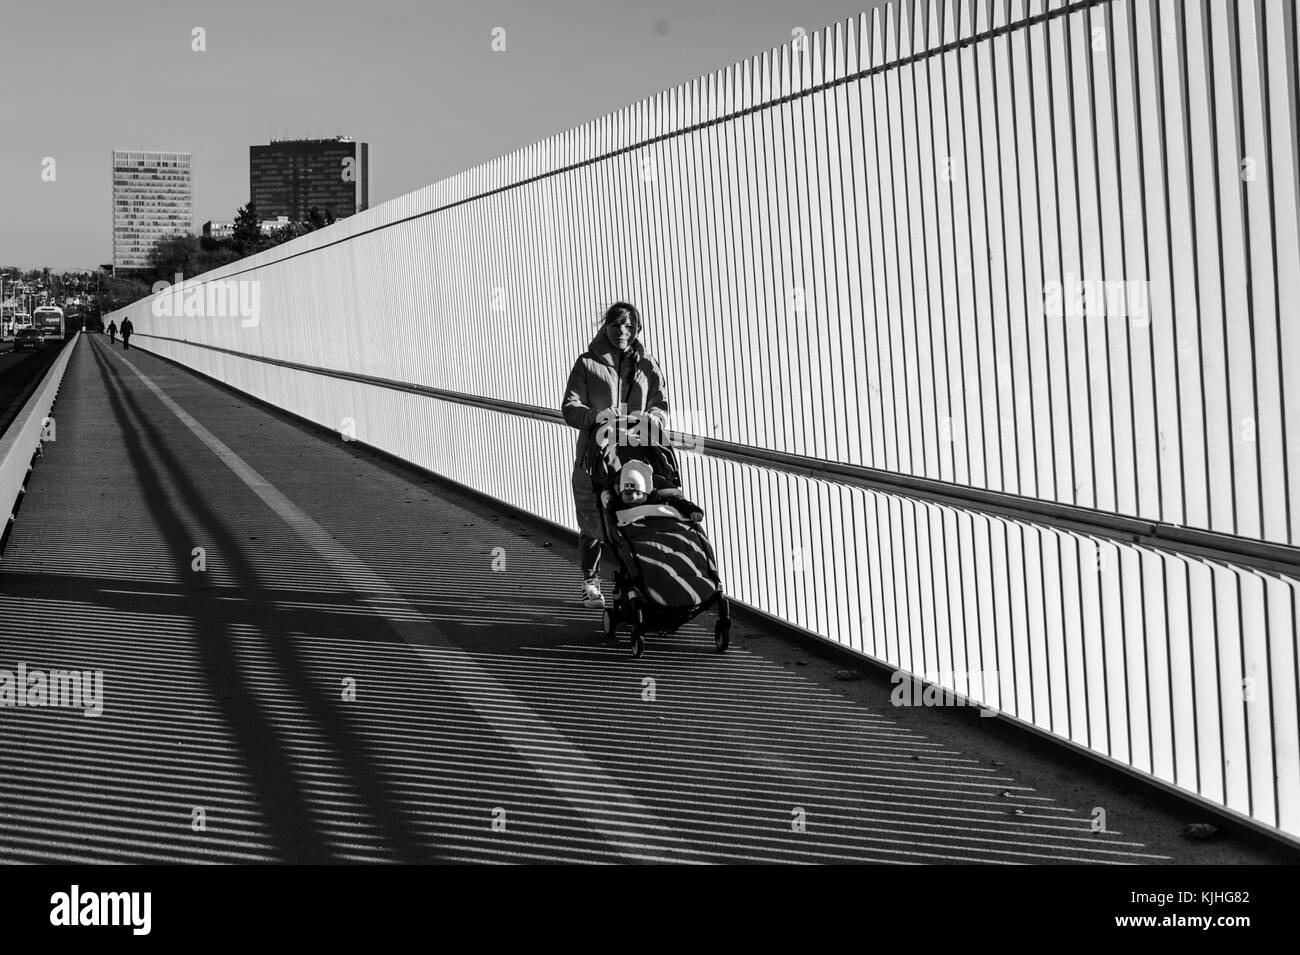 Young woman walking on the bridge with a stroller, black and white, Luxembourg City Stock Photo